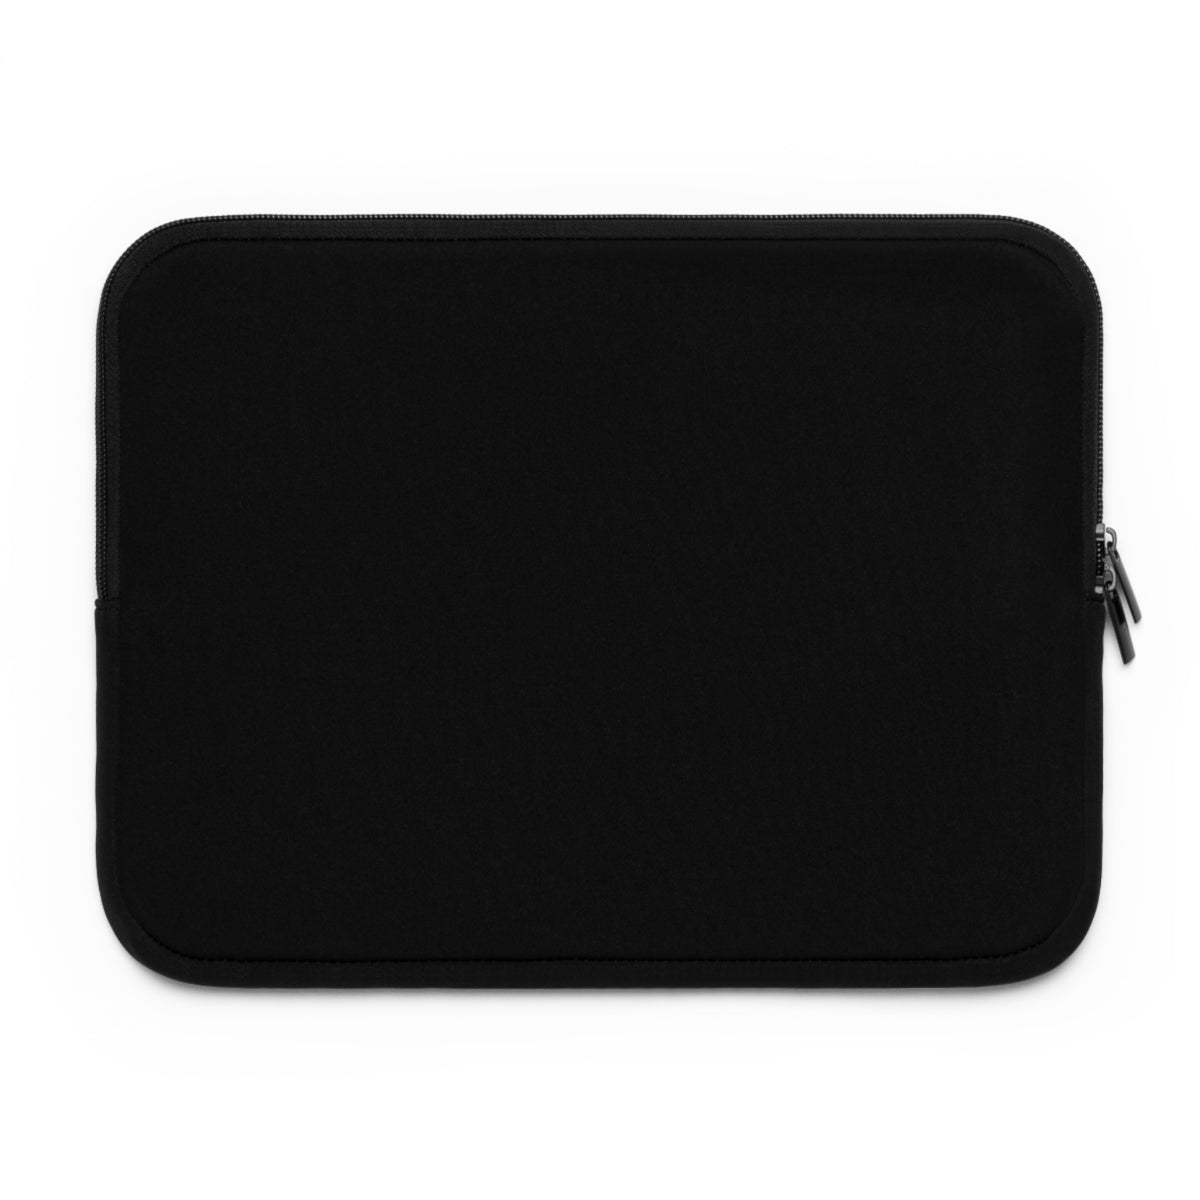 Answering the Call Female Police Laptop Sleeve